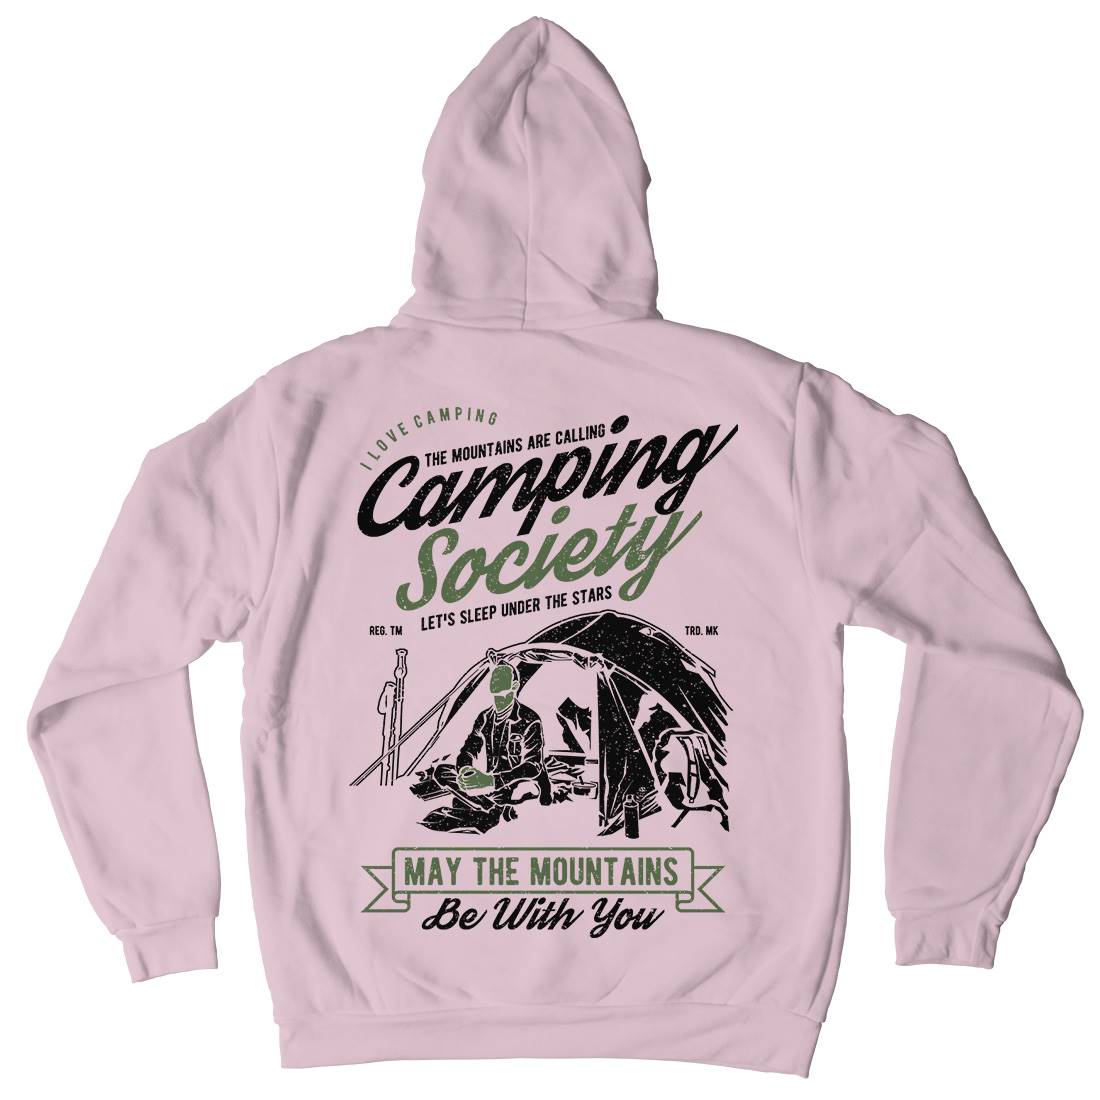 Camping Society Kids Crew Neck Hoodie Nature A631